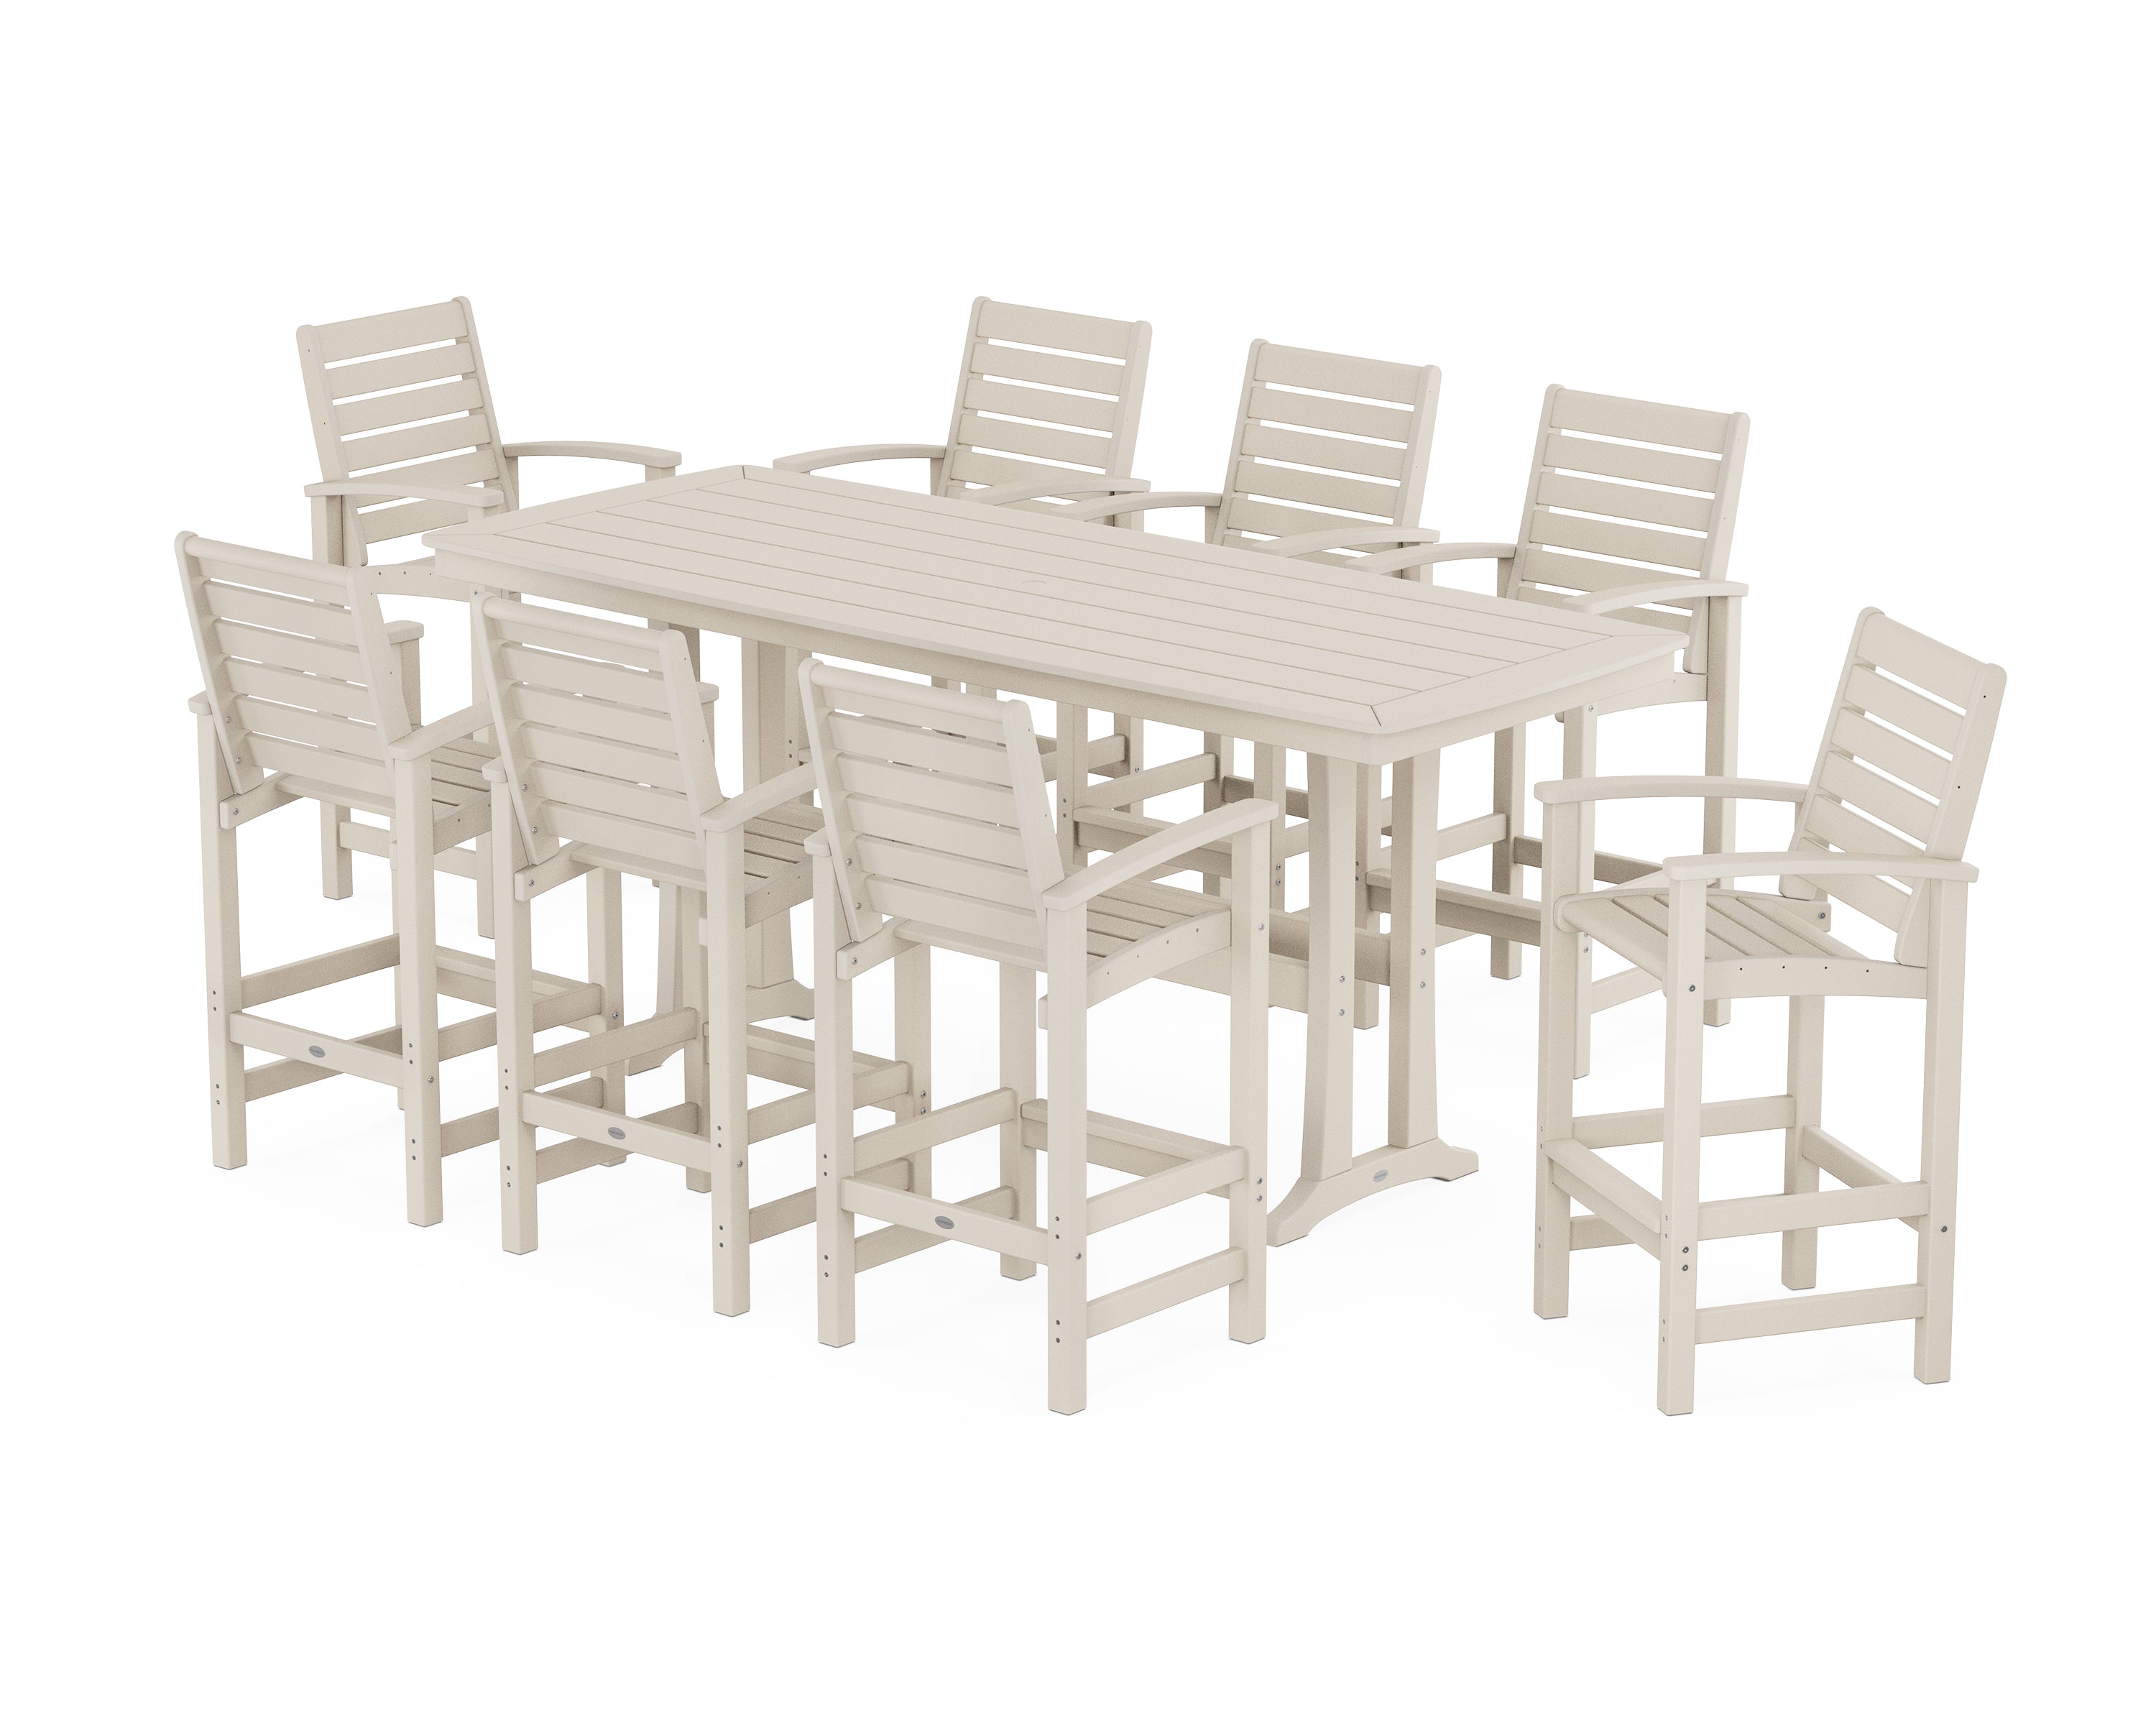 POLYWOOD® Signature 9-Piece Bar Set with Trestle Legs in Sand